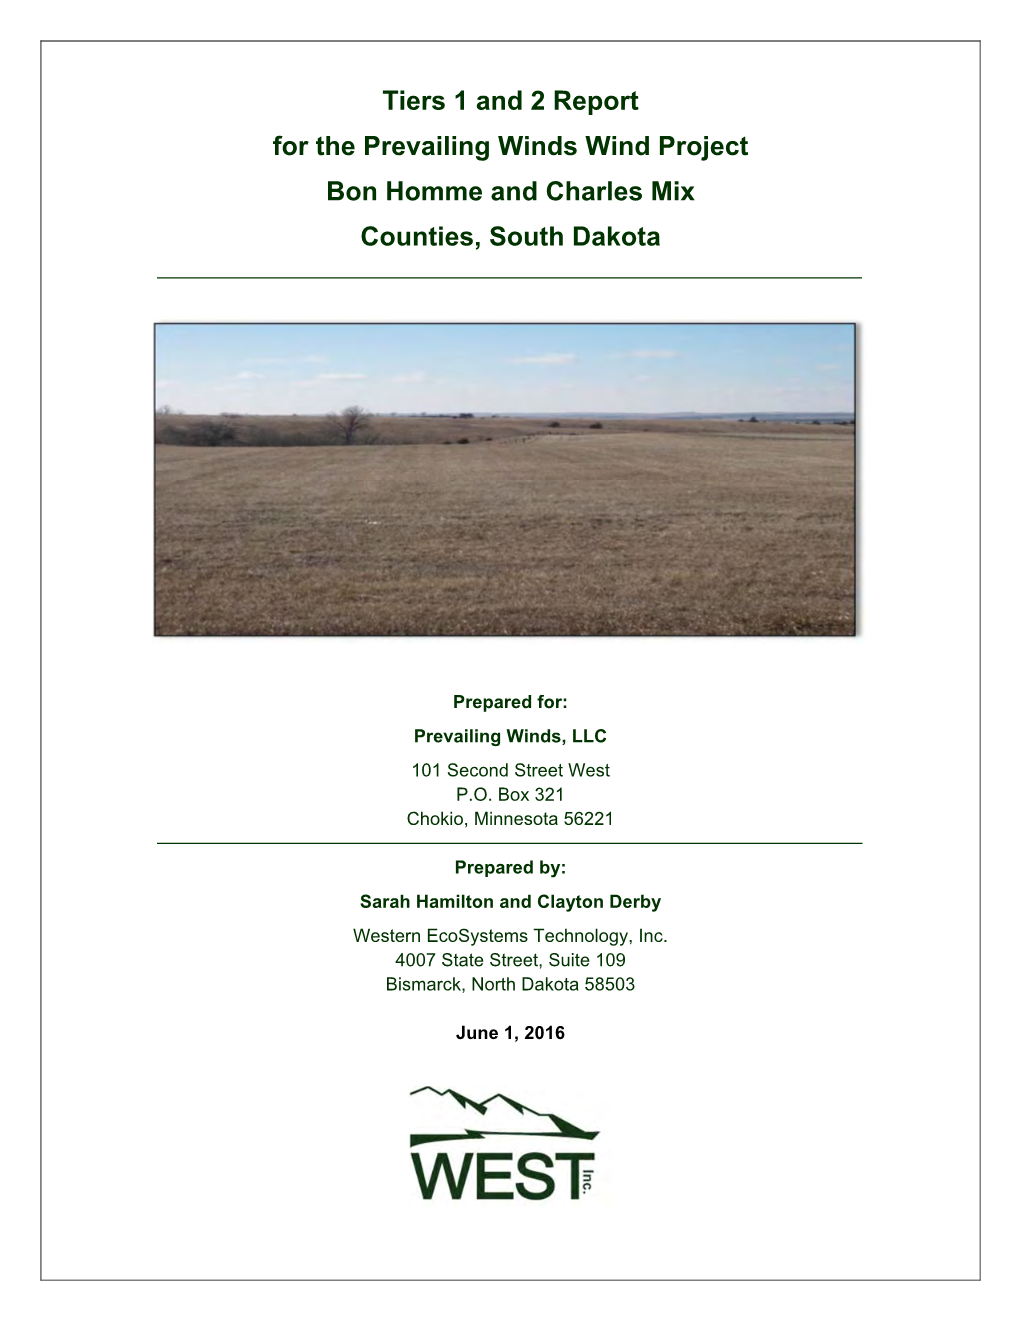 Tiers 1 and 2 Report for the Prevailing Winds Wind Project Bon Homme and Charles Mix Counties, South Dakota